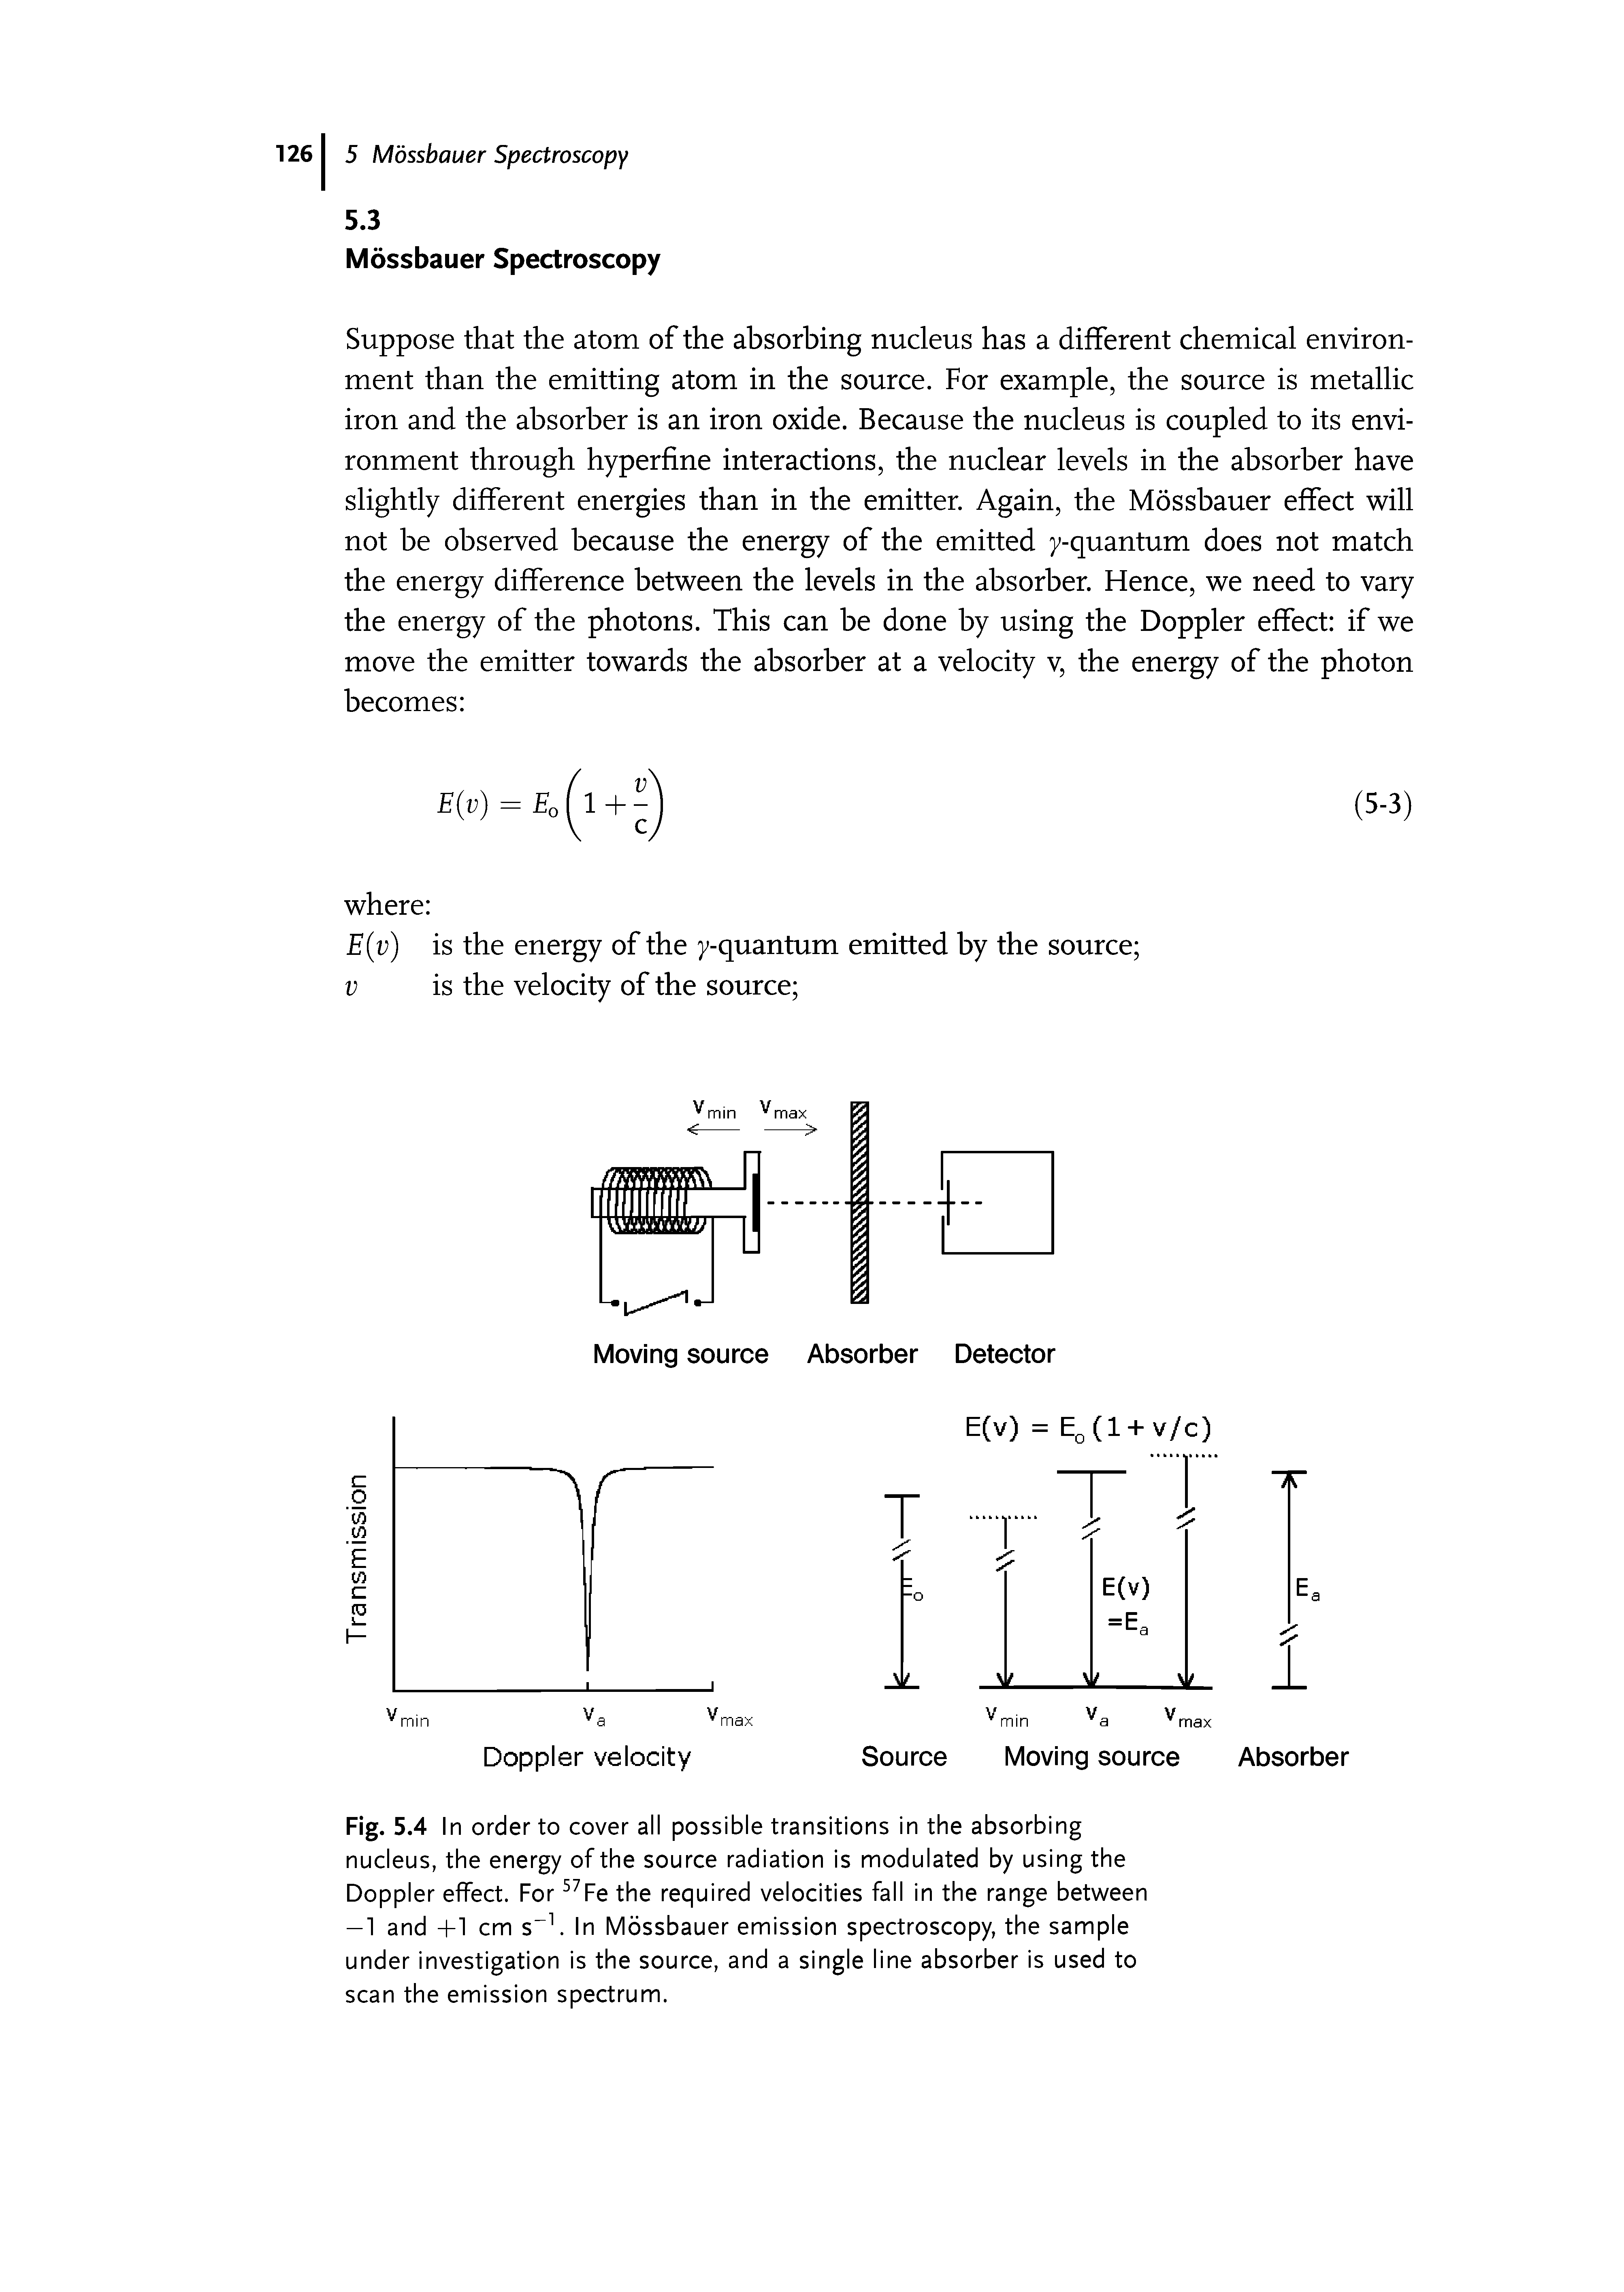 Fig. 5.4 In order to cover all possible transitions in the absorbing nucleus, the energy of the source radiation is modulated by using the Doppler effect. For 57Fe the required velocities fall in the range between — 1 and +1 cm s-1. In Mdssbauer emission spectroscopy, the sample under investigation is the source, and a single line absorber is used to scan the emission spectrum.